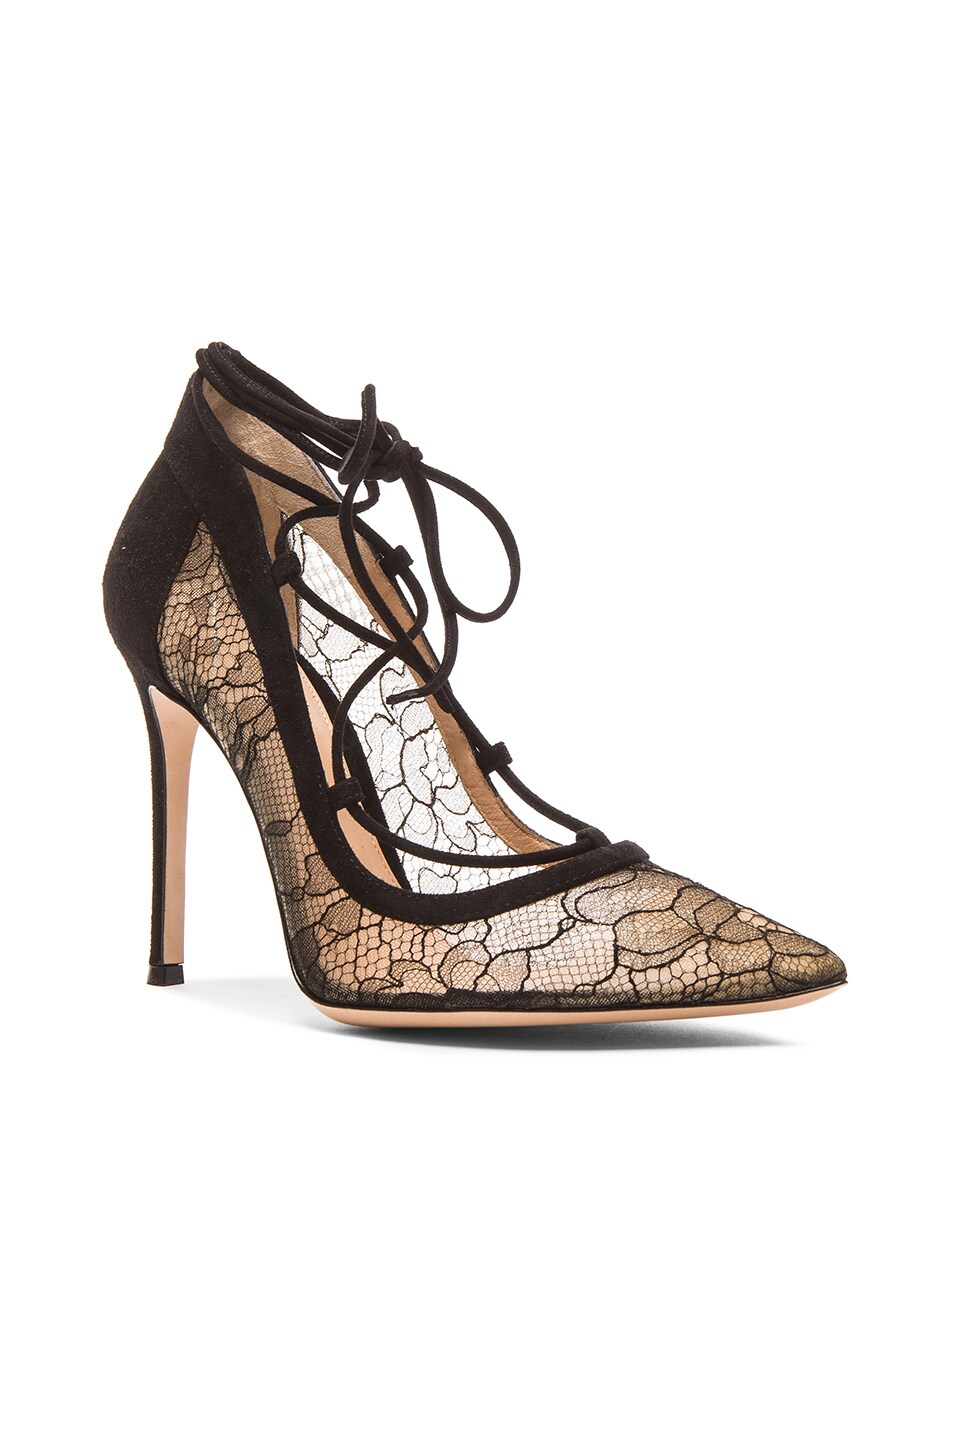 Gianvito Rossi Lace & Leather Femi Lace Up Pumps in Black | FWRD